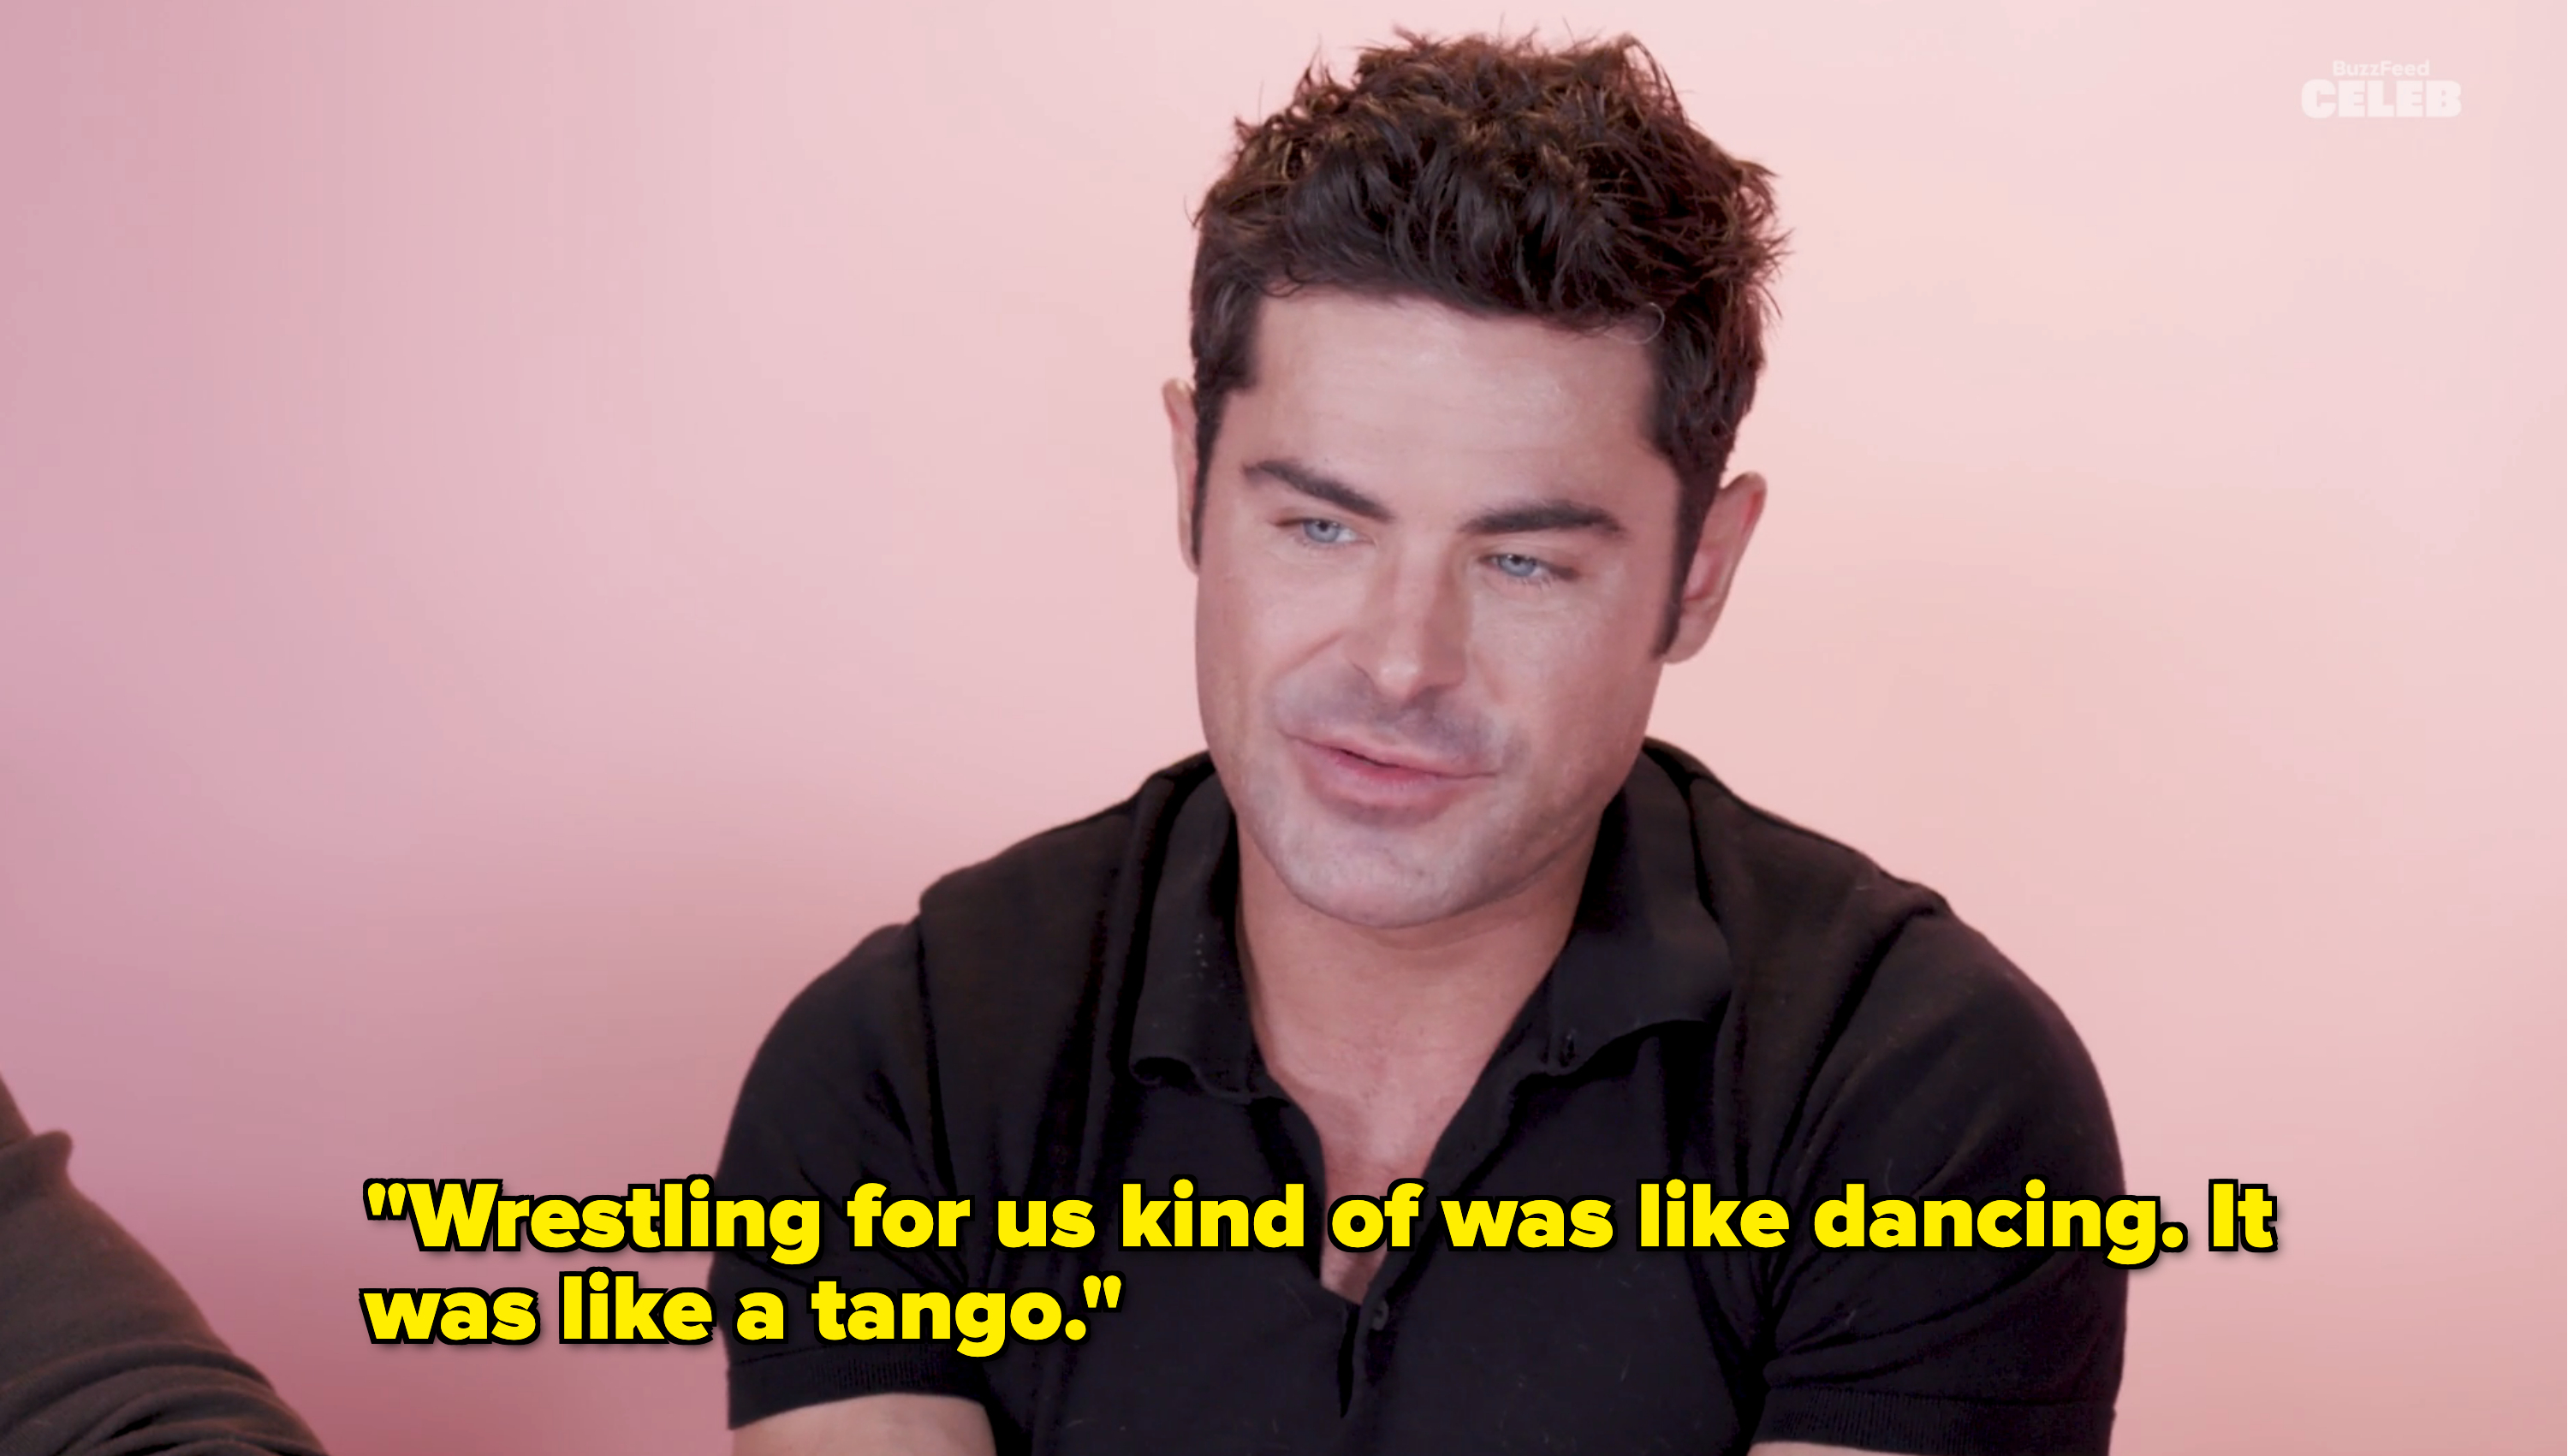 &quot;Wrestling for us kind of was like dancing. It was like a tango&quot;